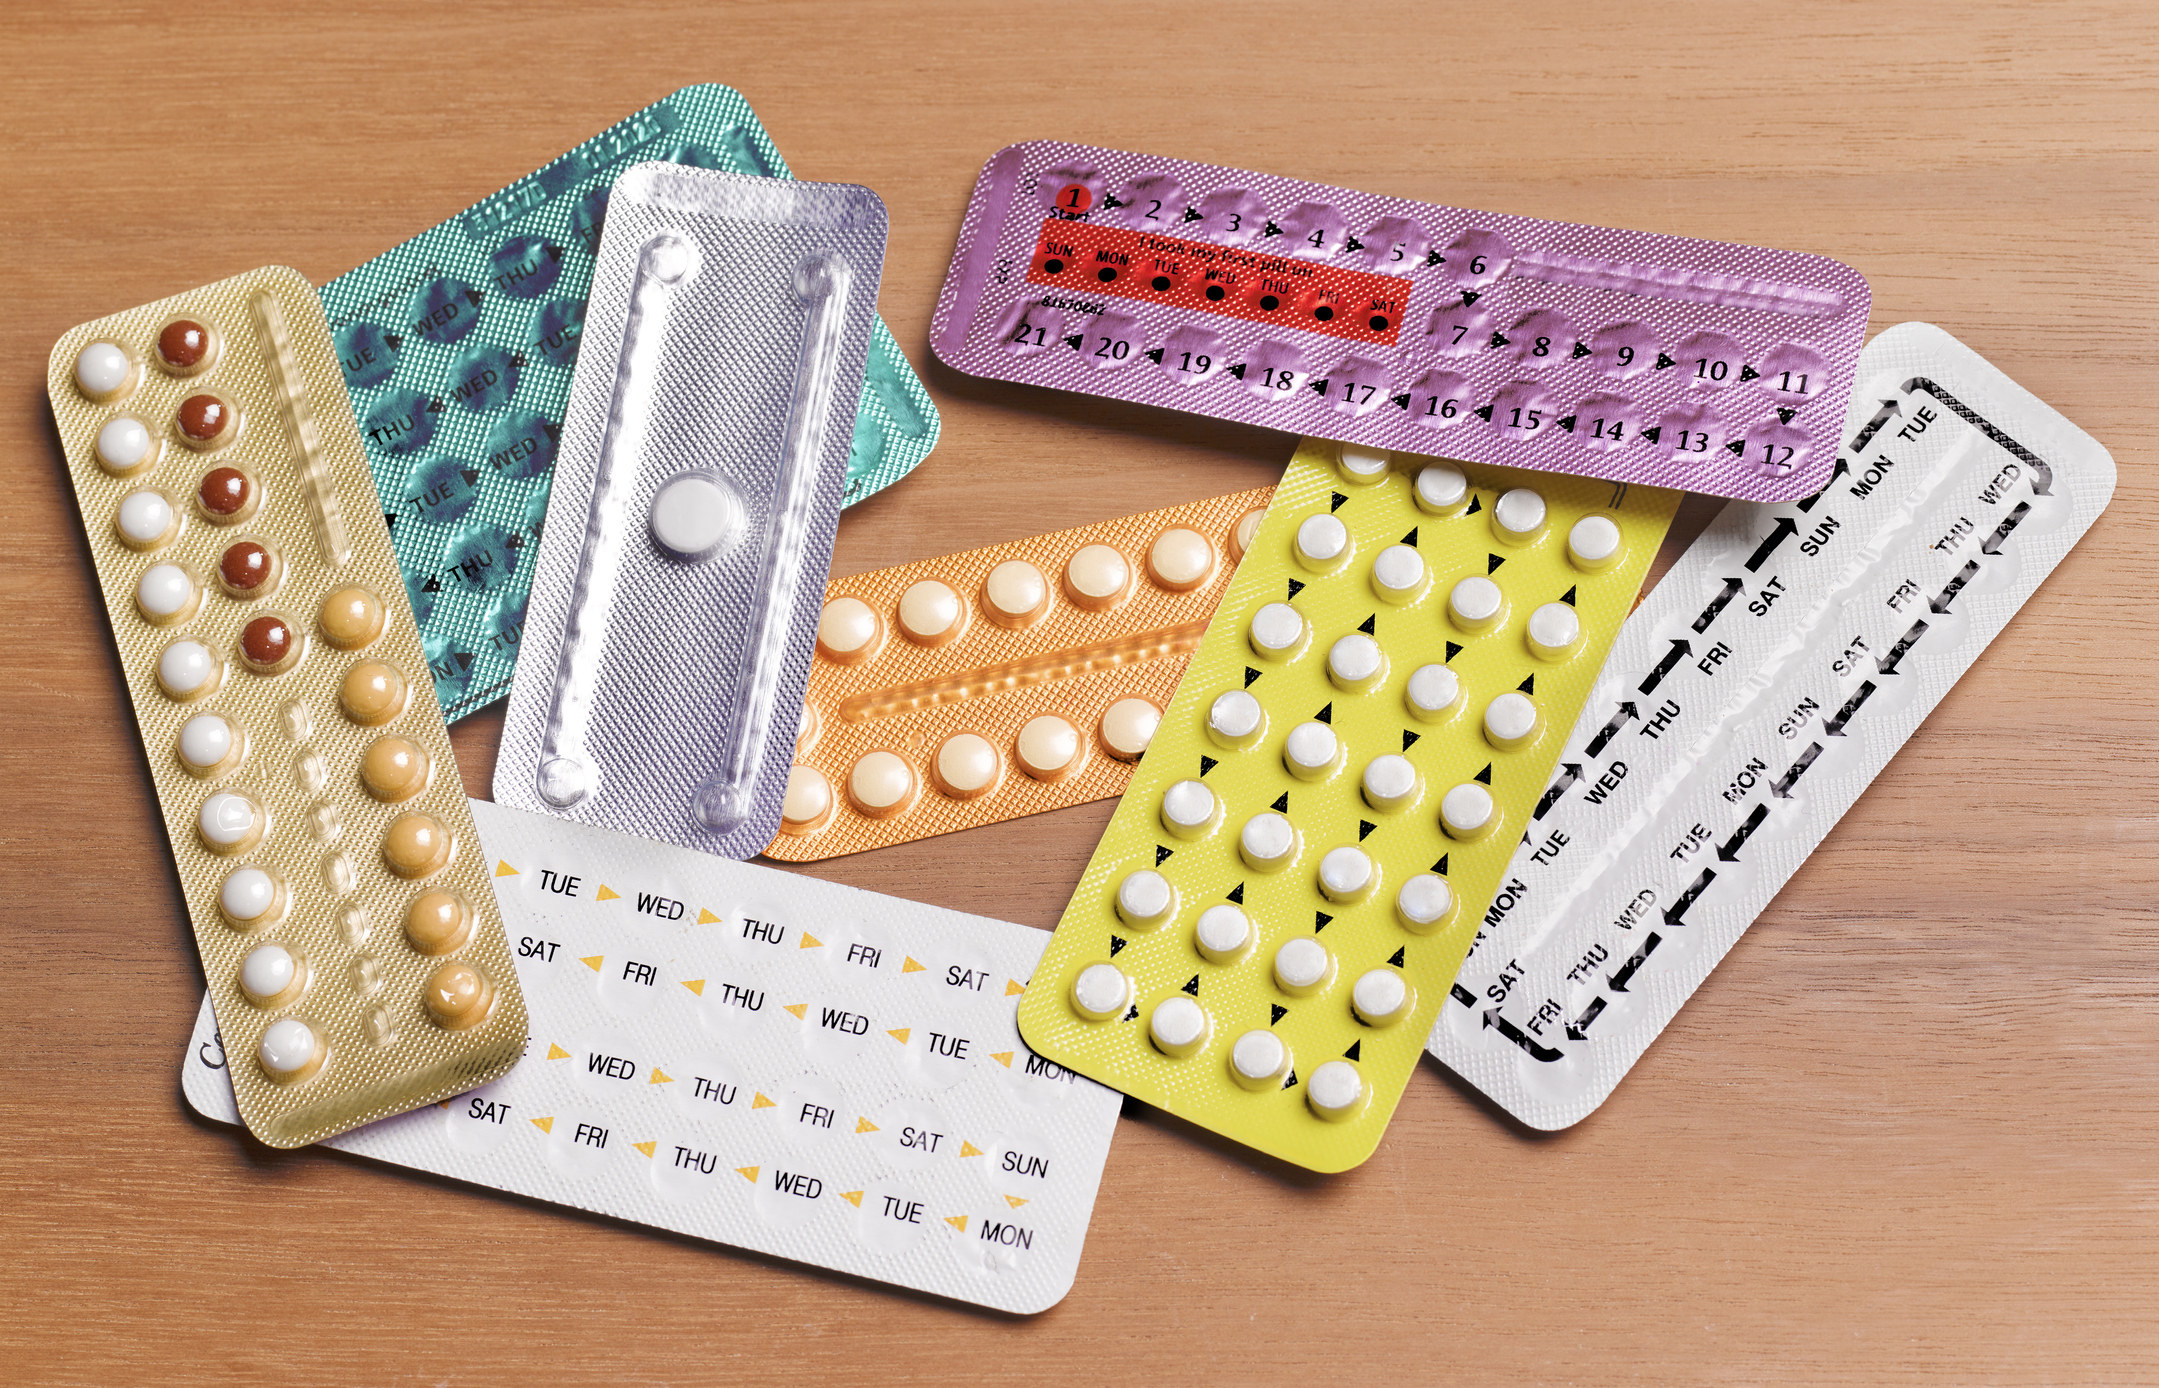 birth control pills strewn about on a table